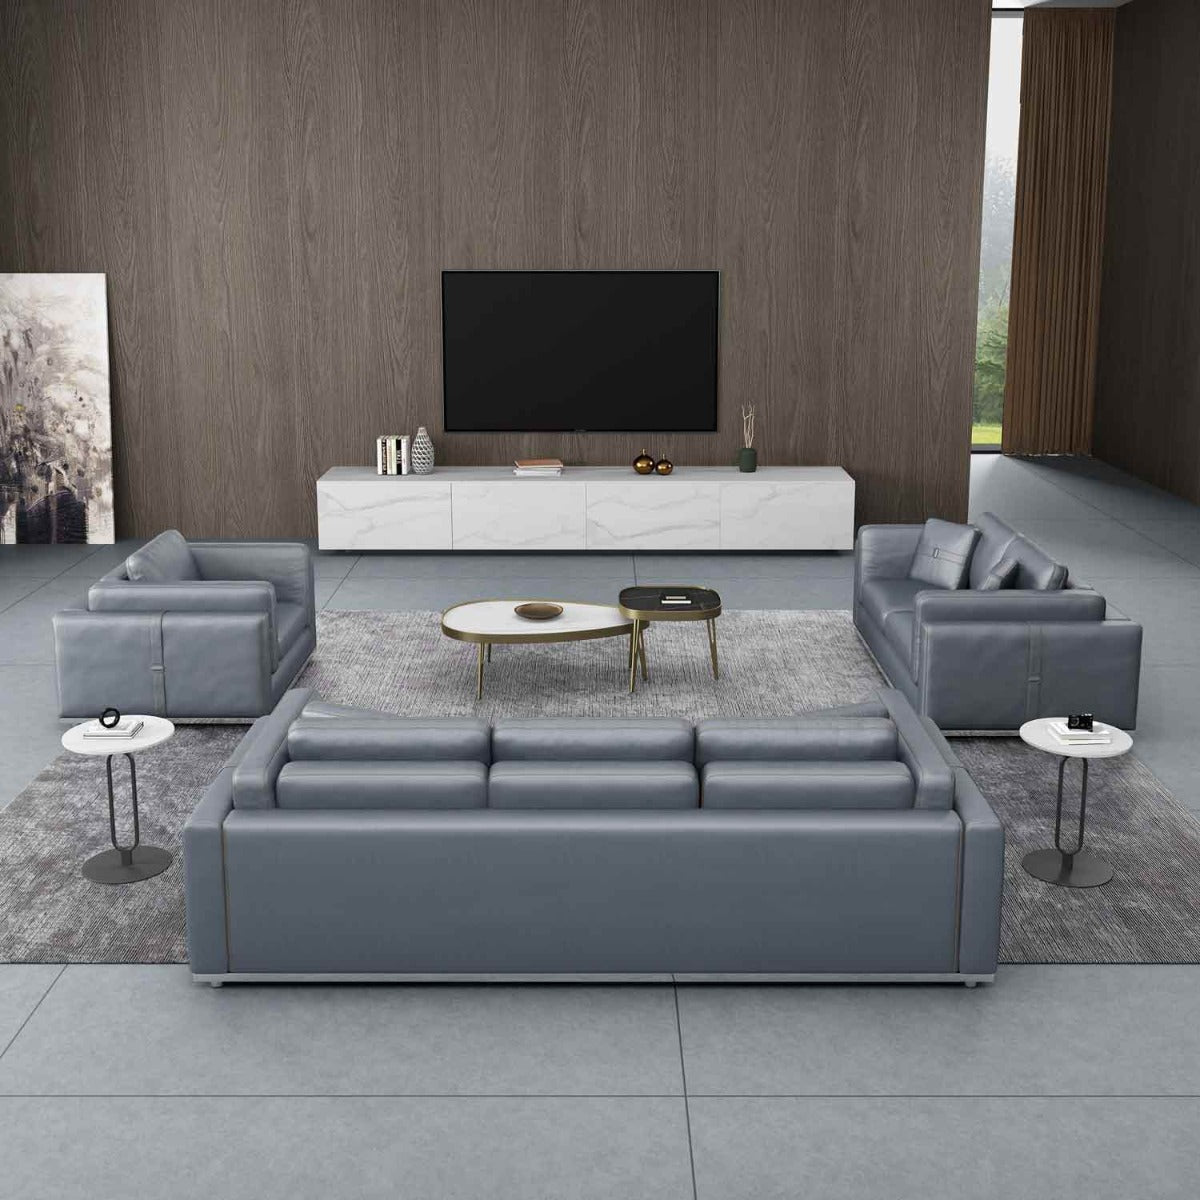 European Furniture - Picasso Sofa in Smokey Gray - 25550-S - New Star Living